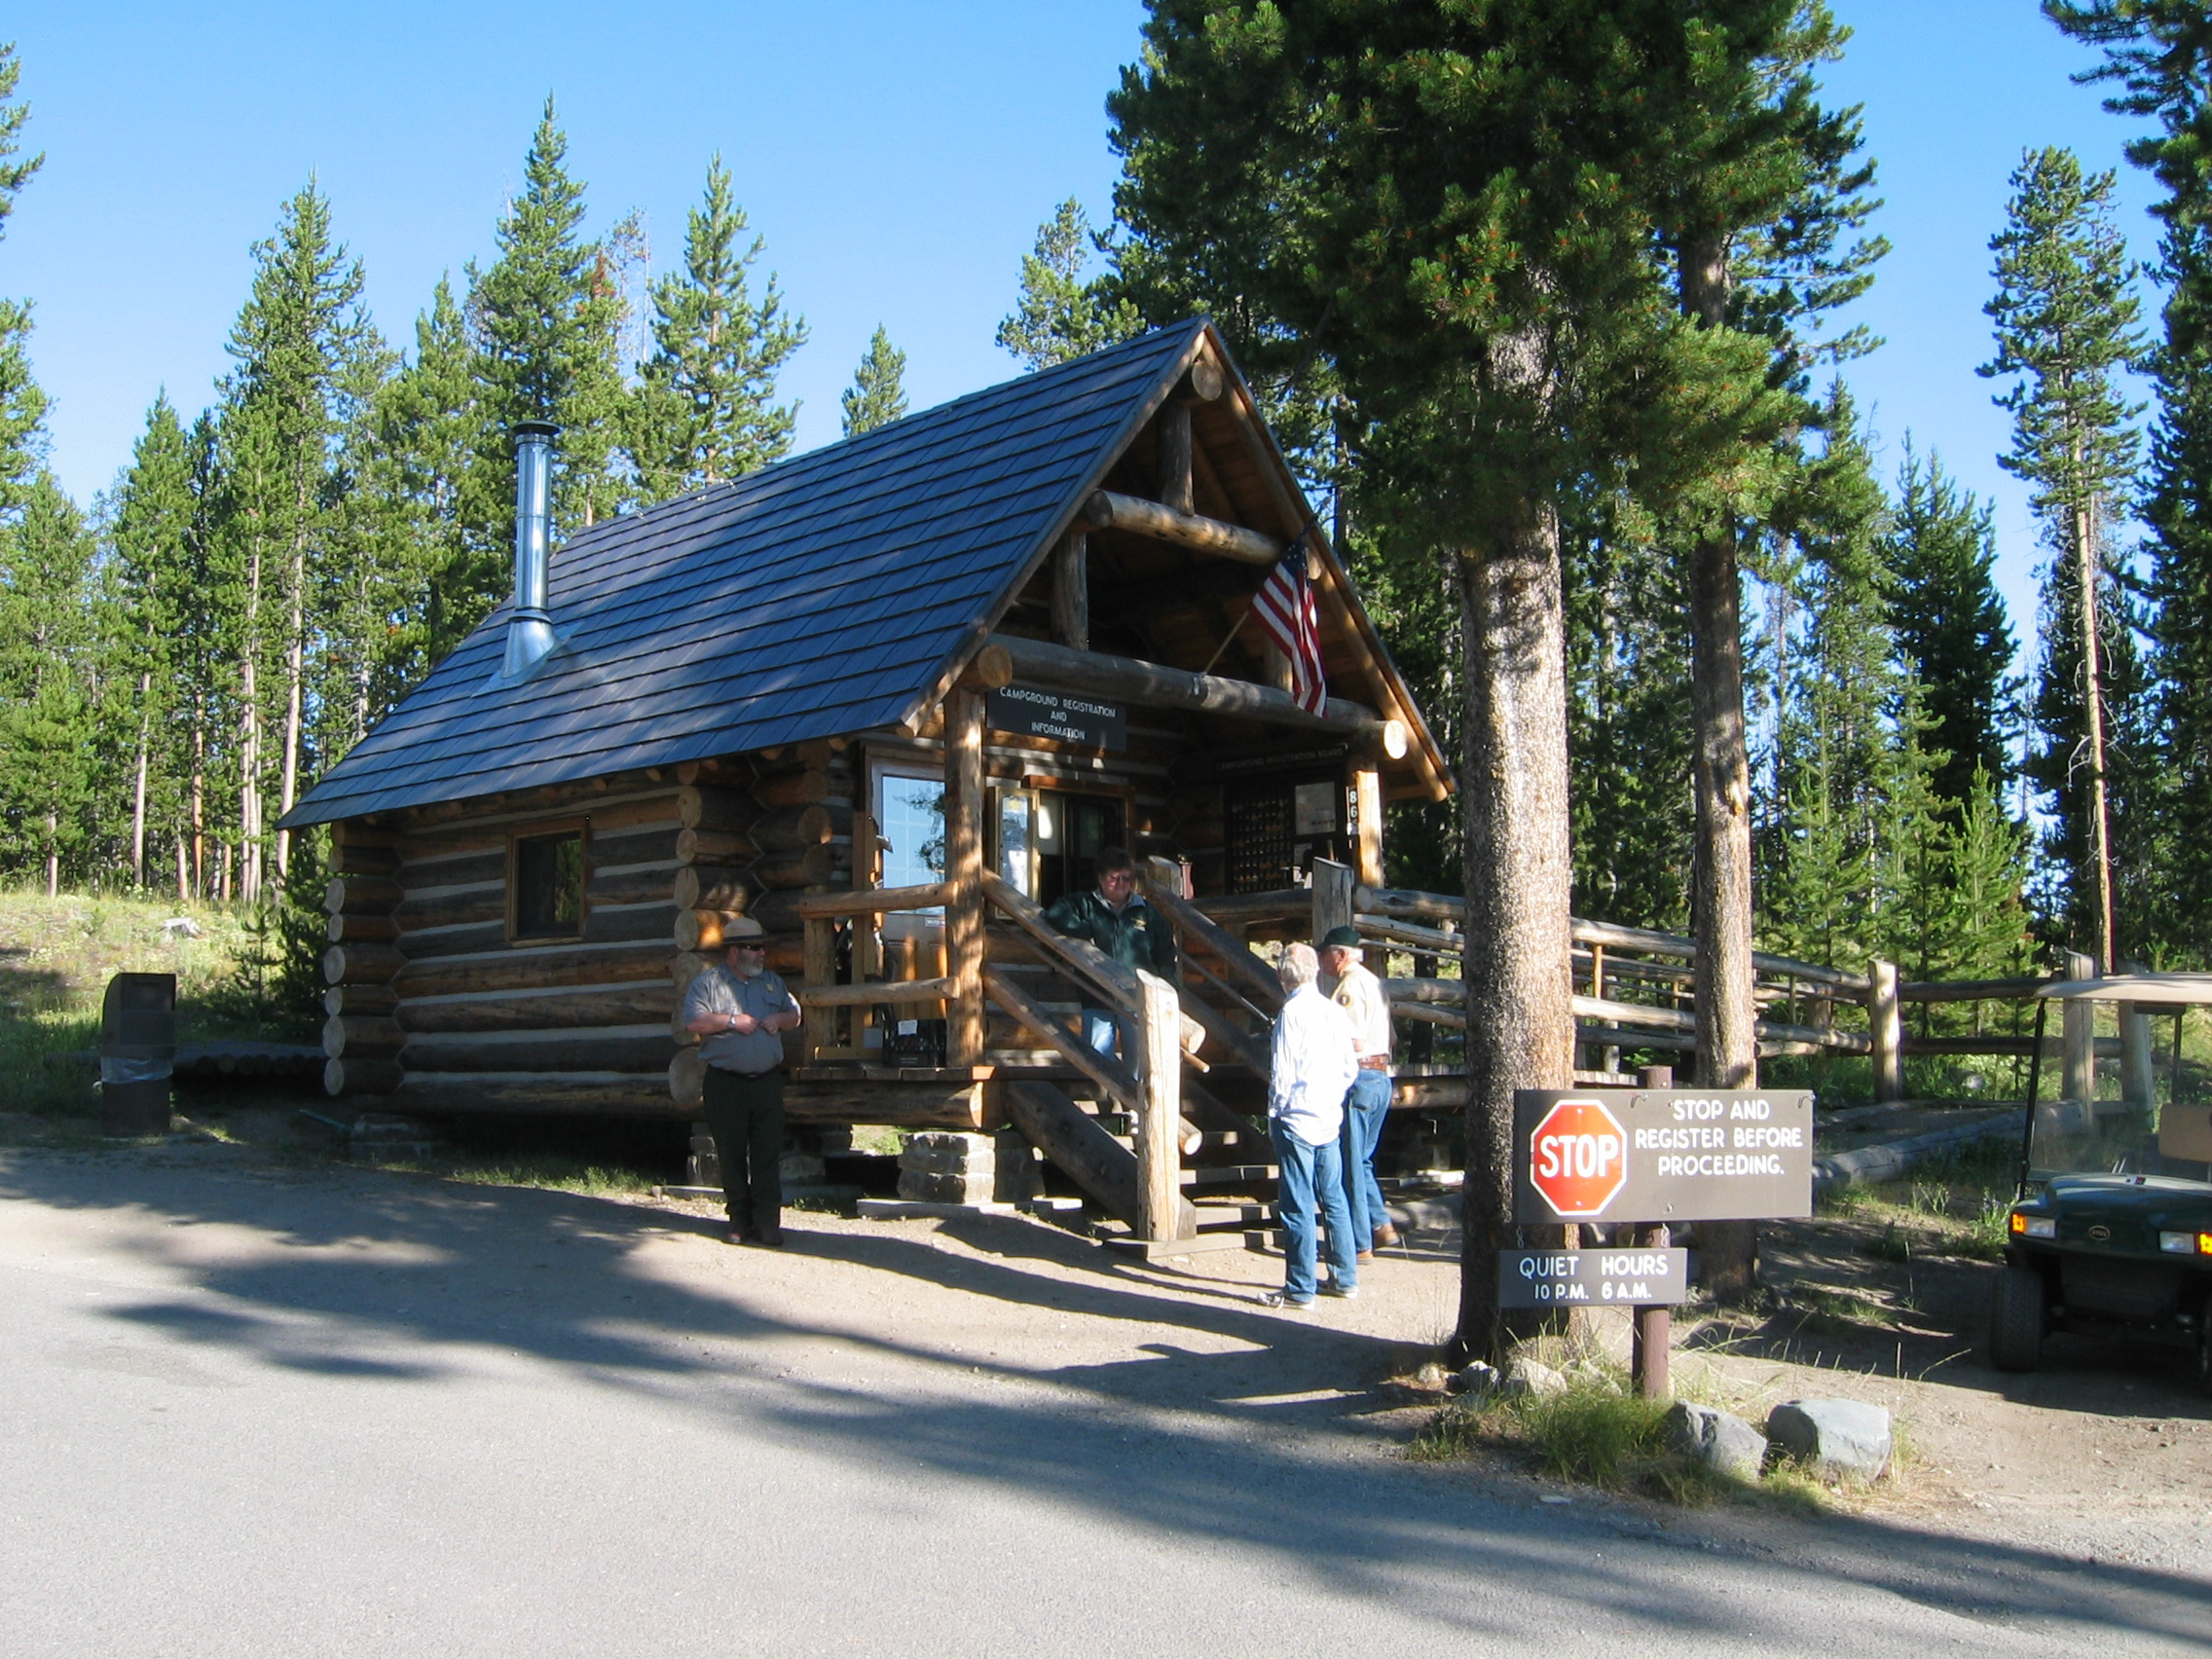 People standing in front of log building